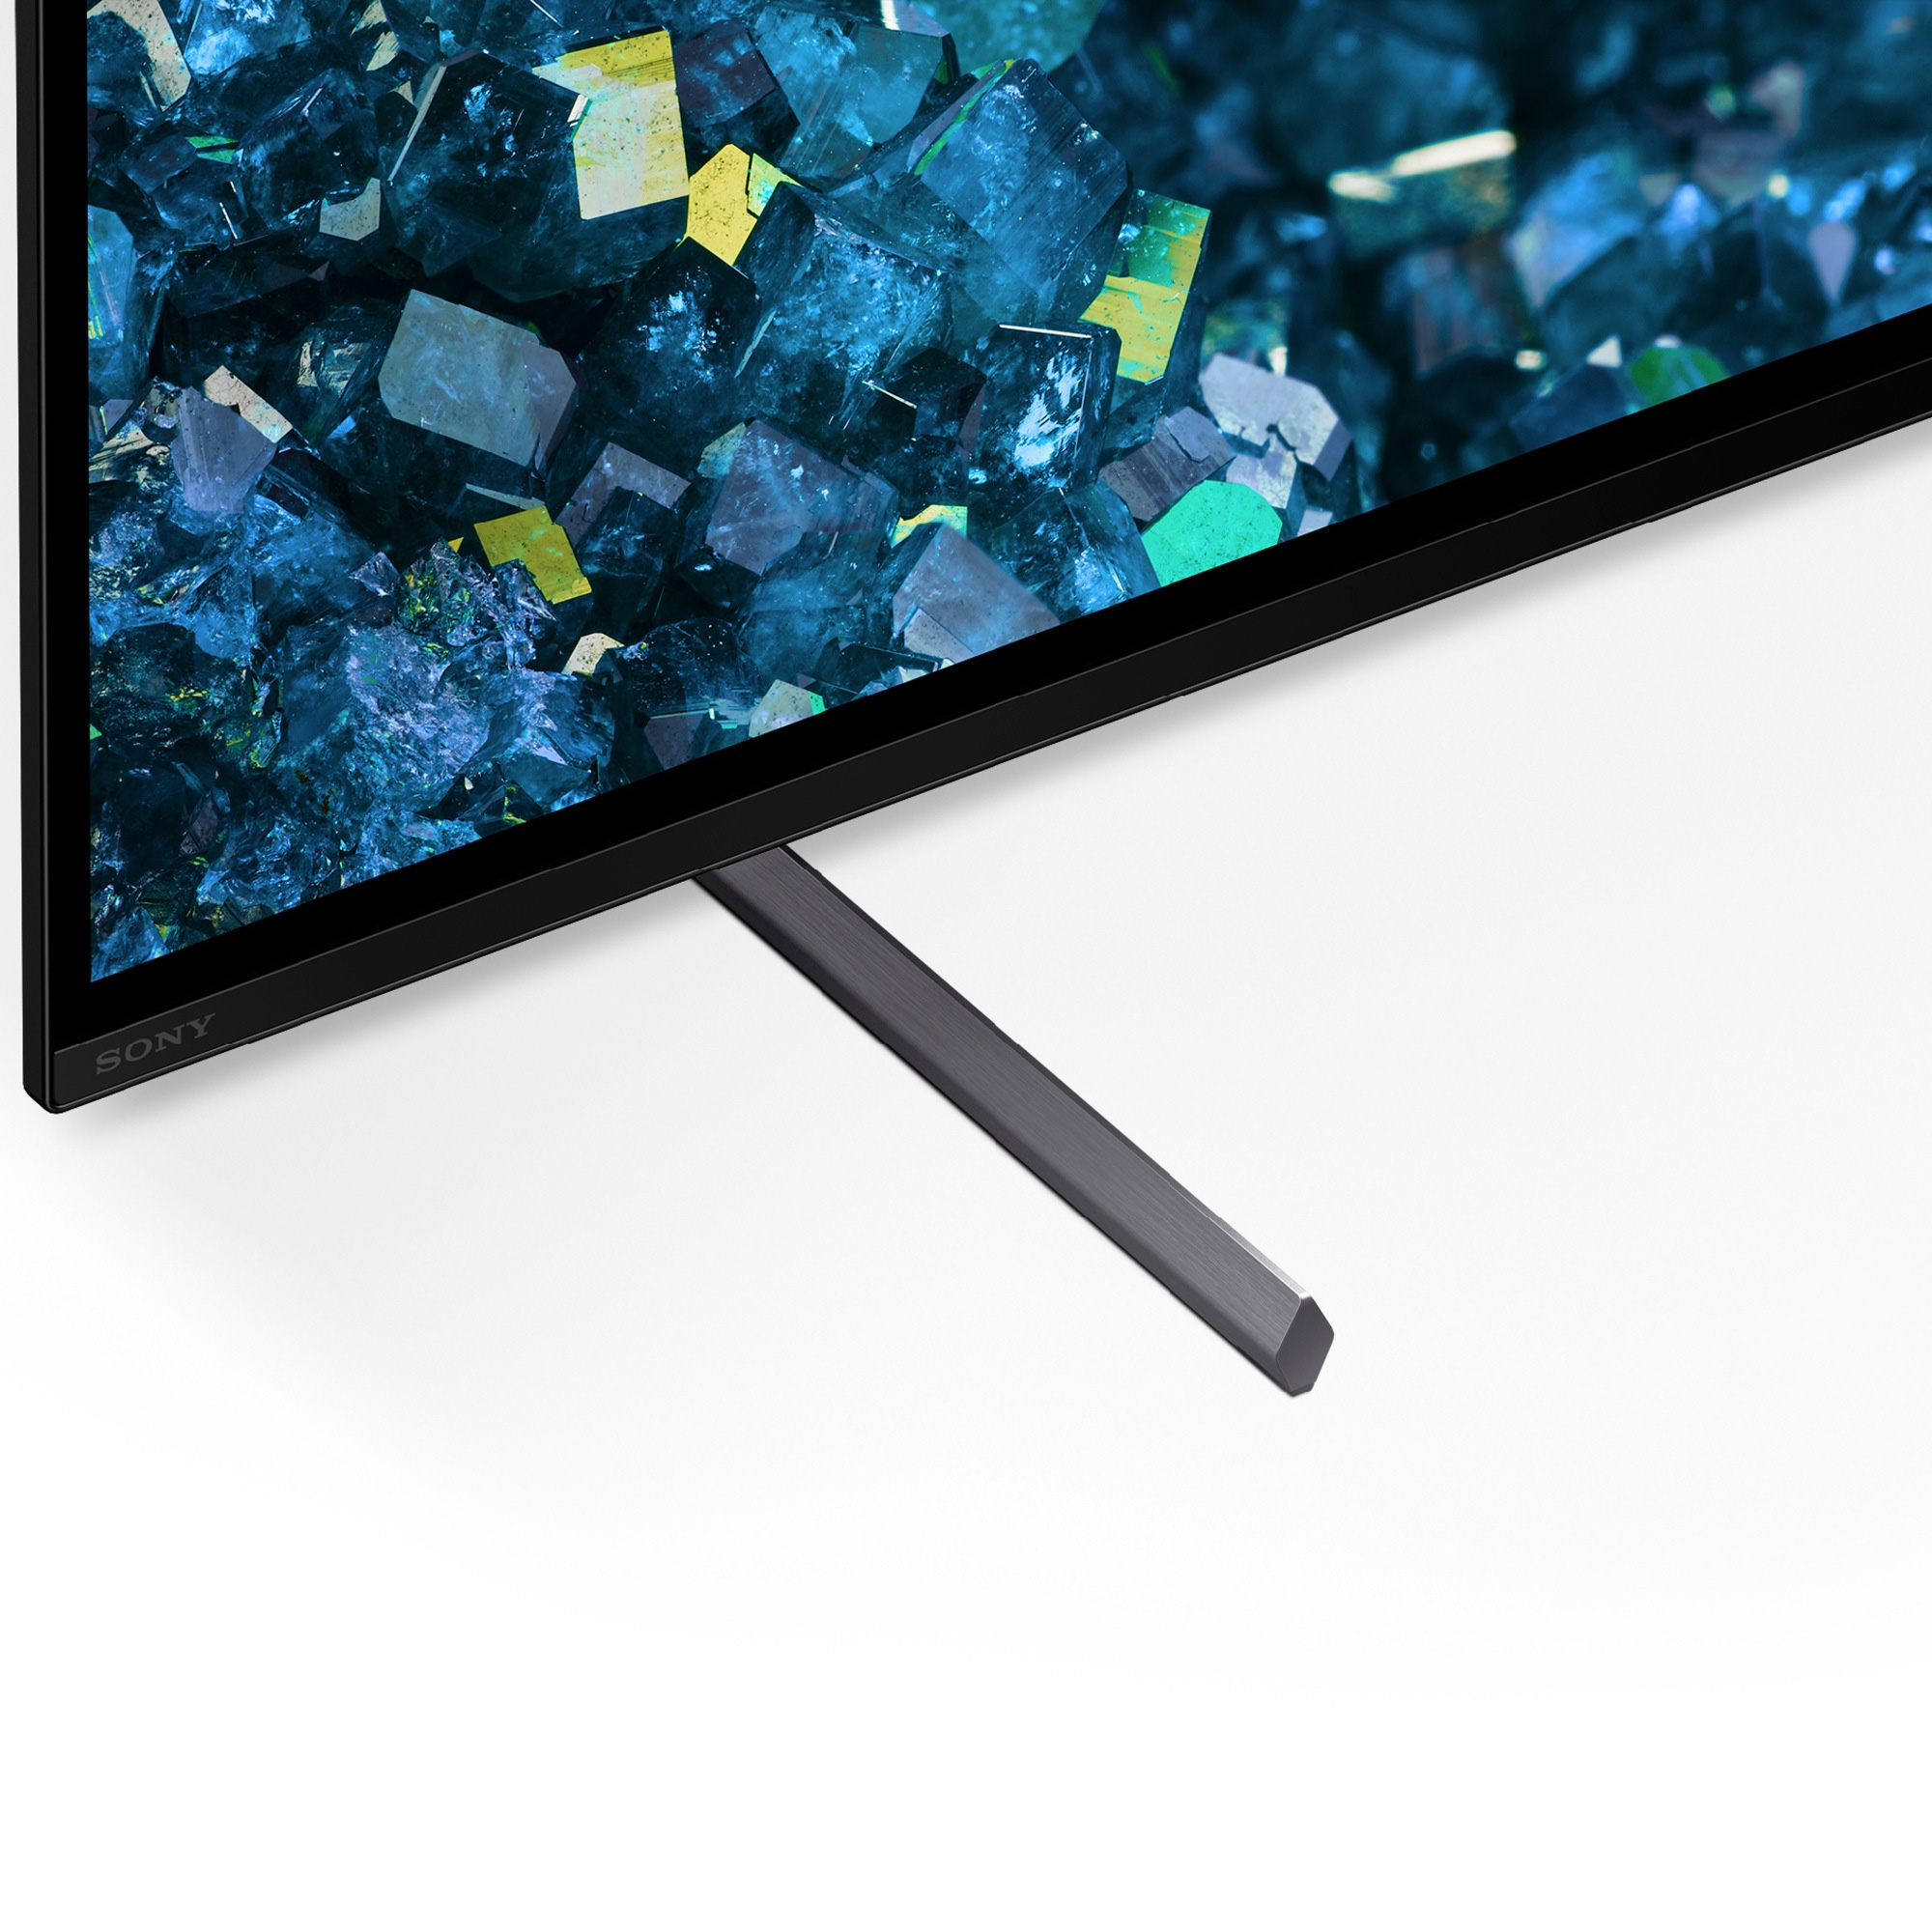 OLED TV Sony XR-65A80LAEP